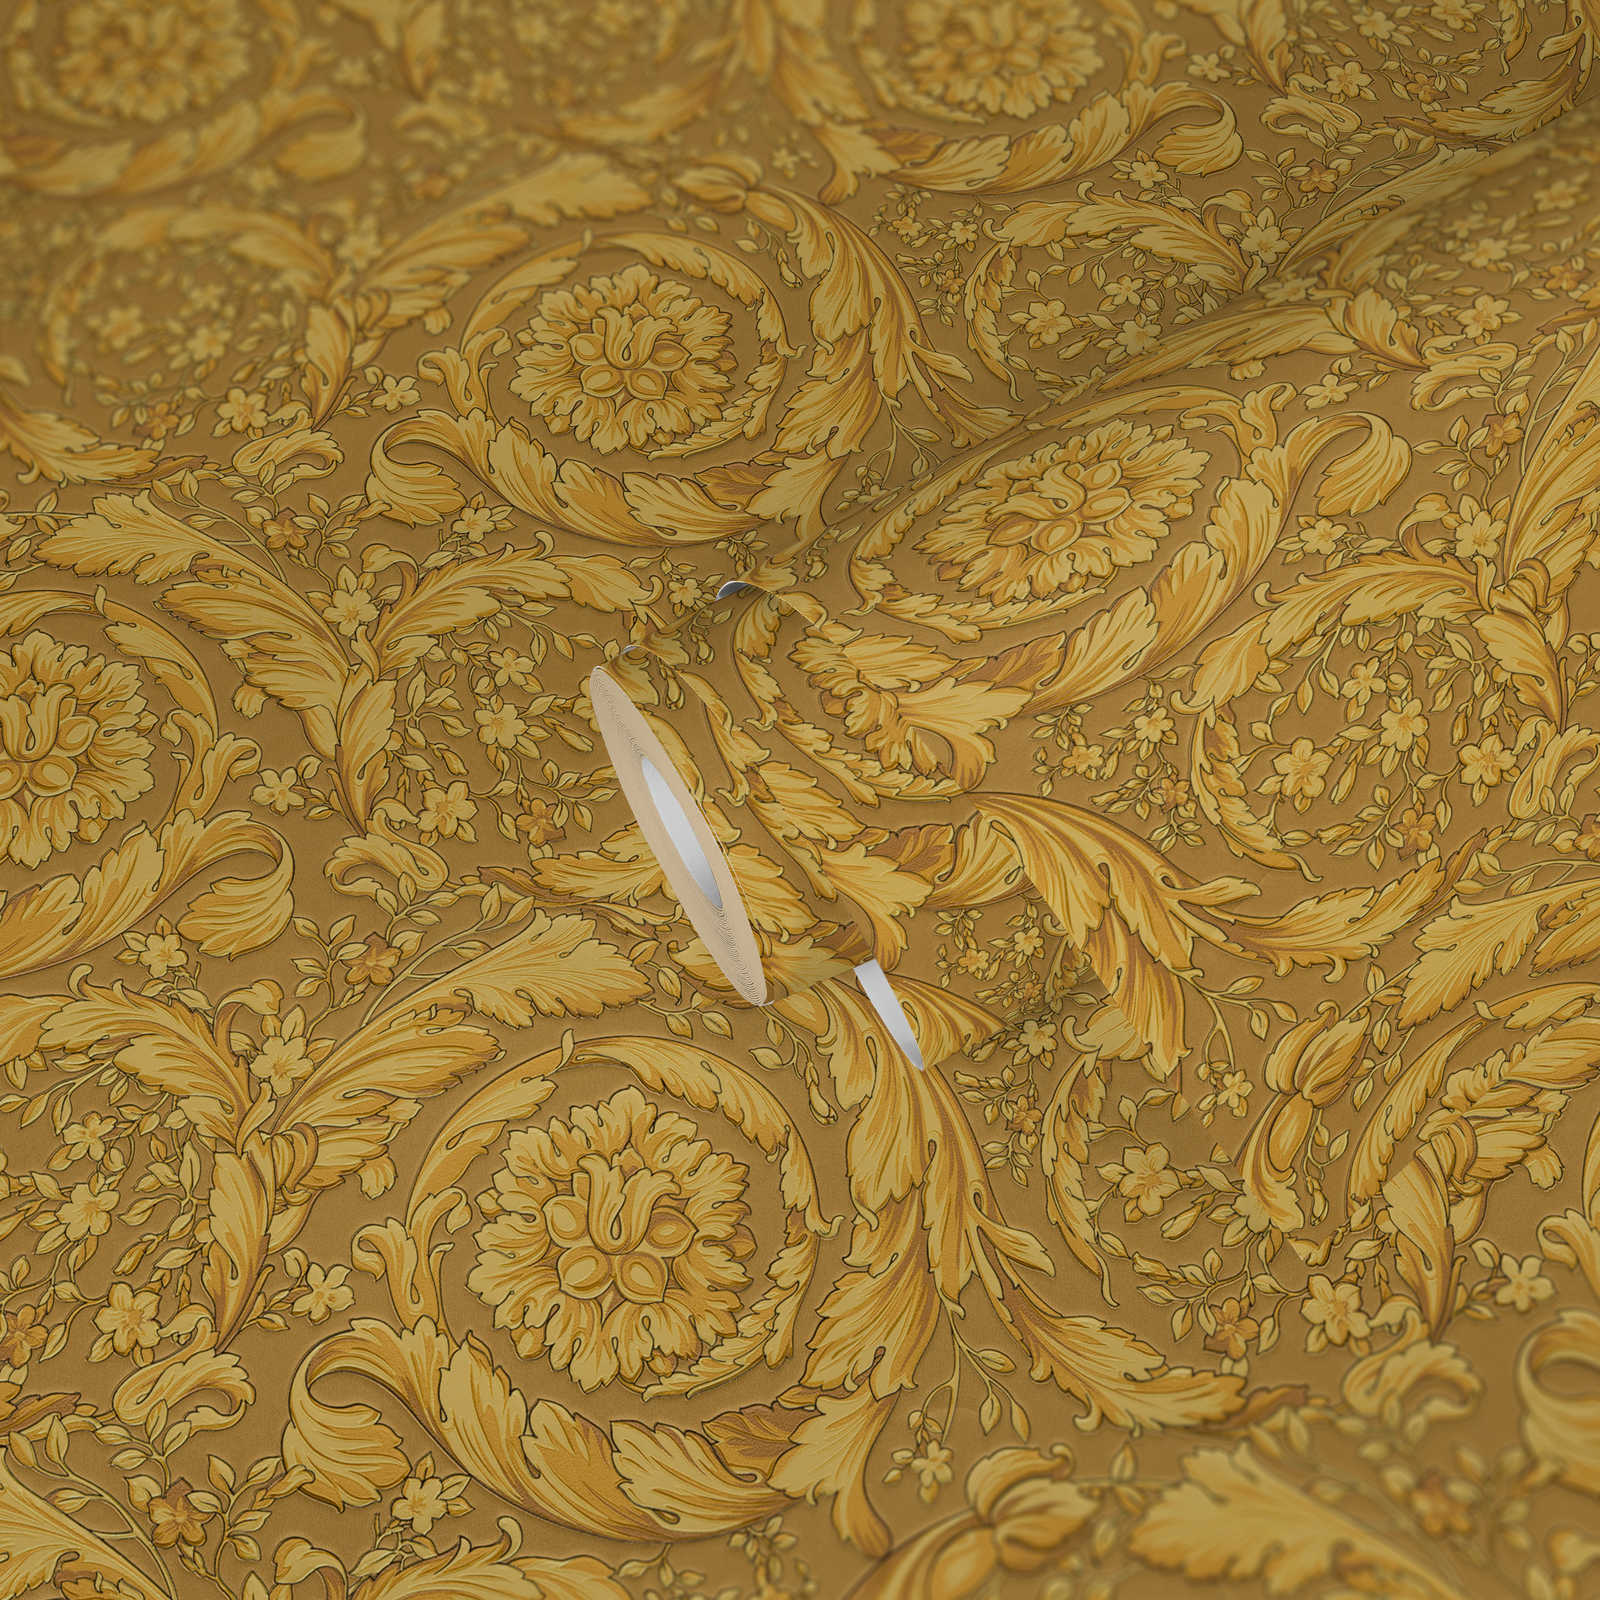             VERSACE wallpaper with ornamental floral pattern - gold
        